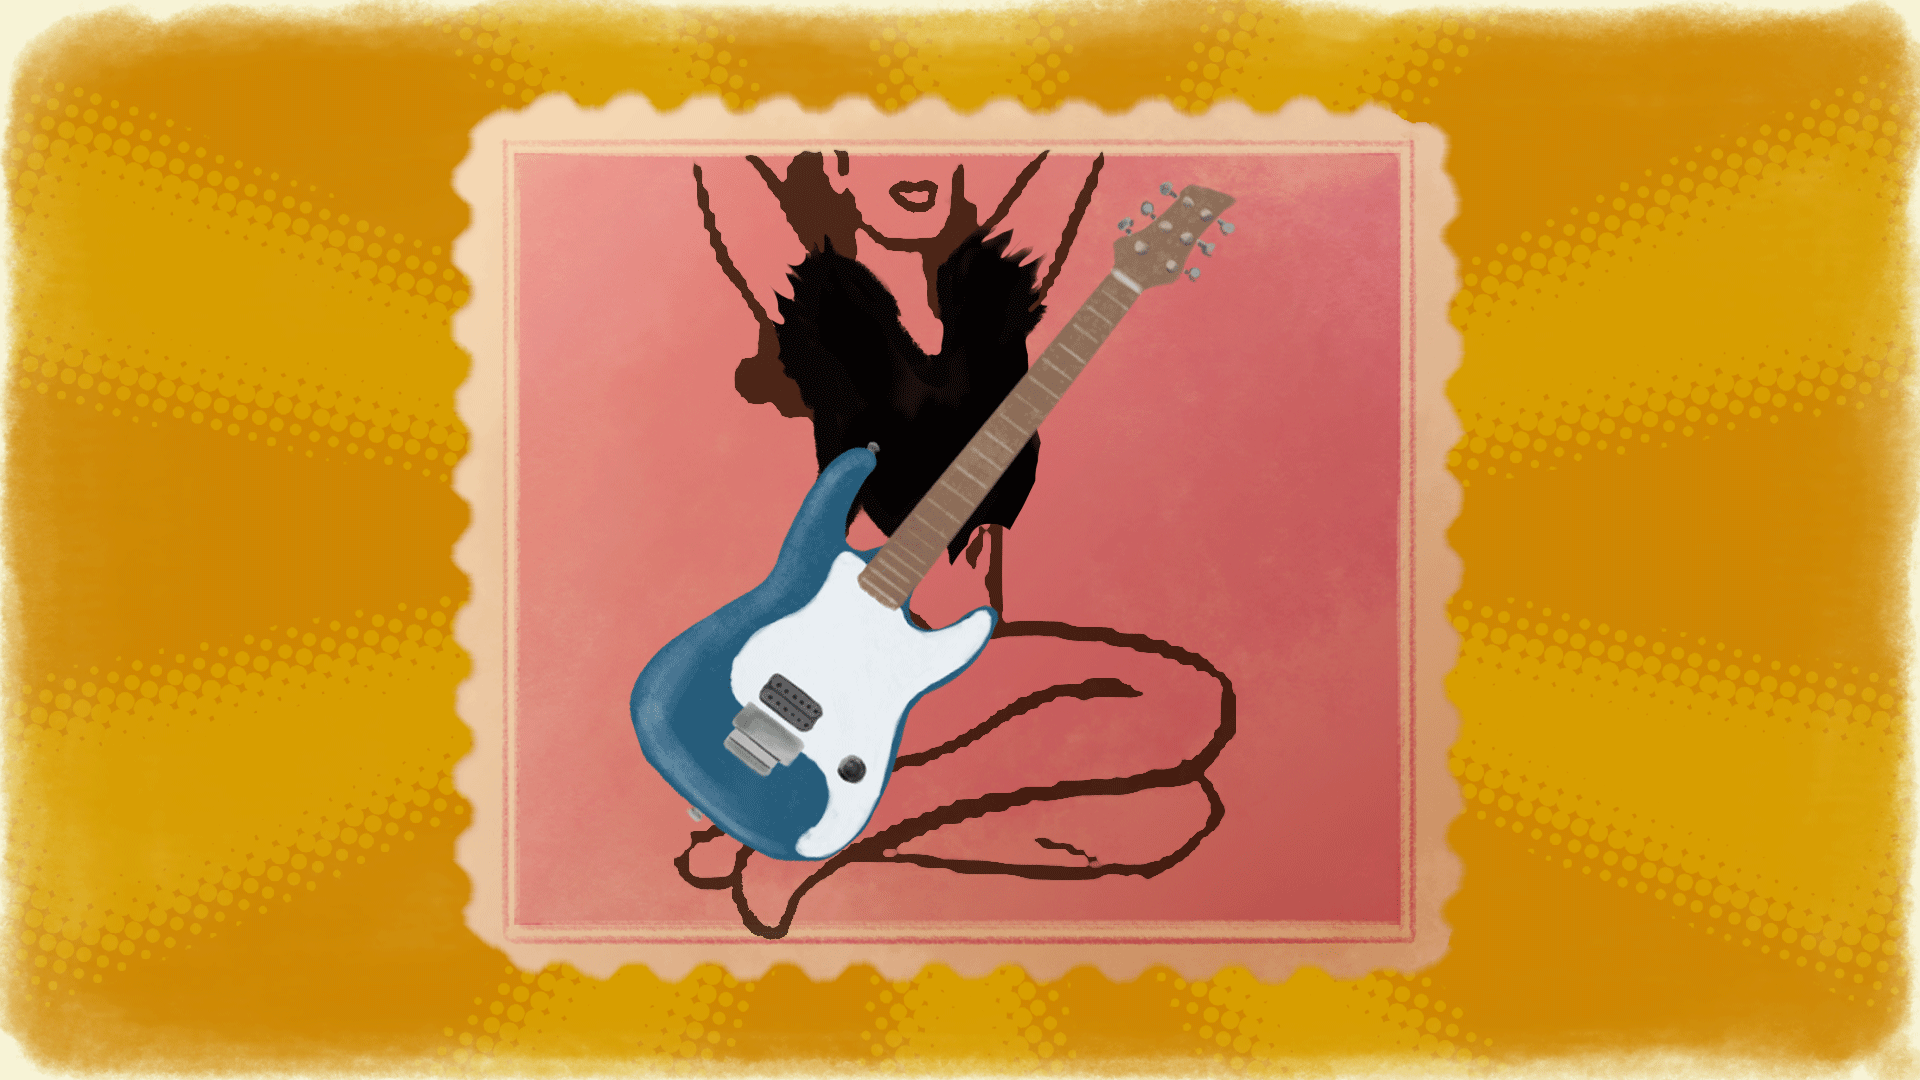 Icon for Rock Star!